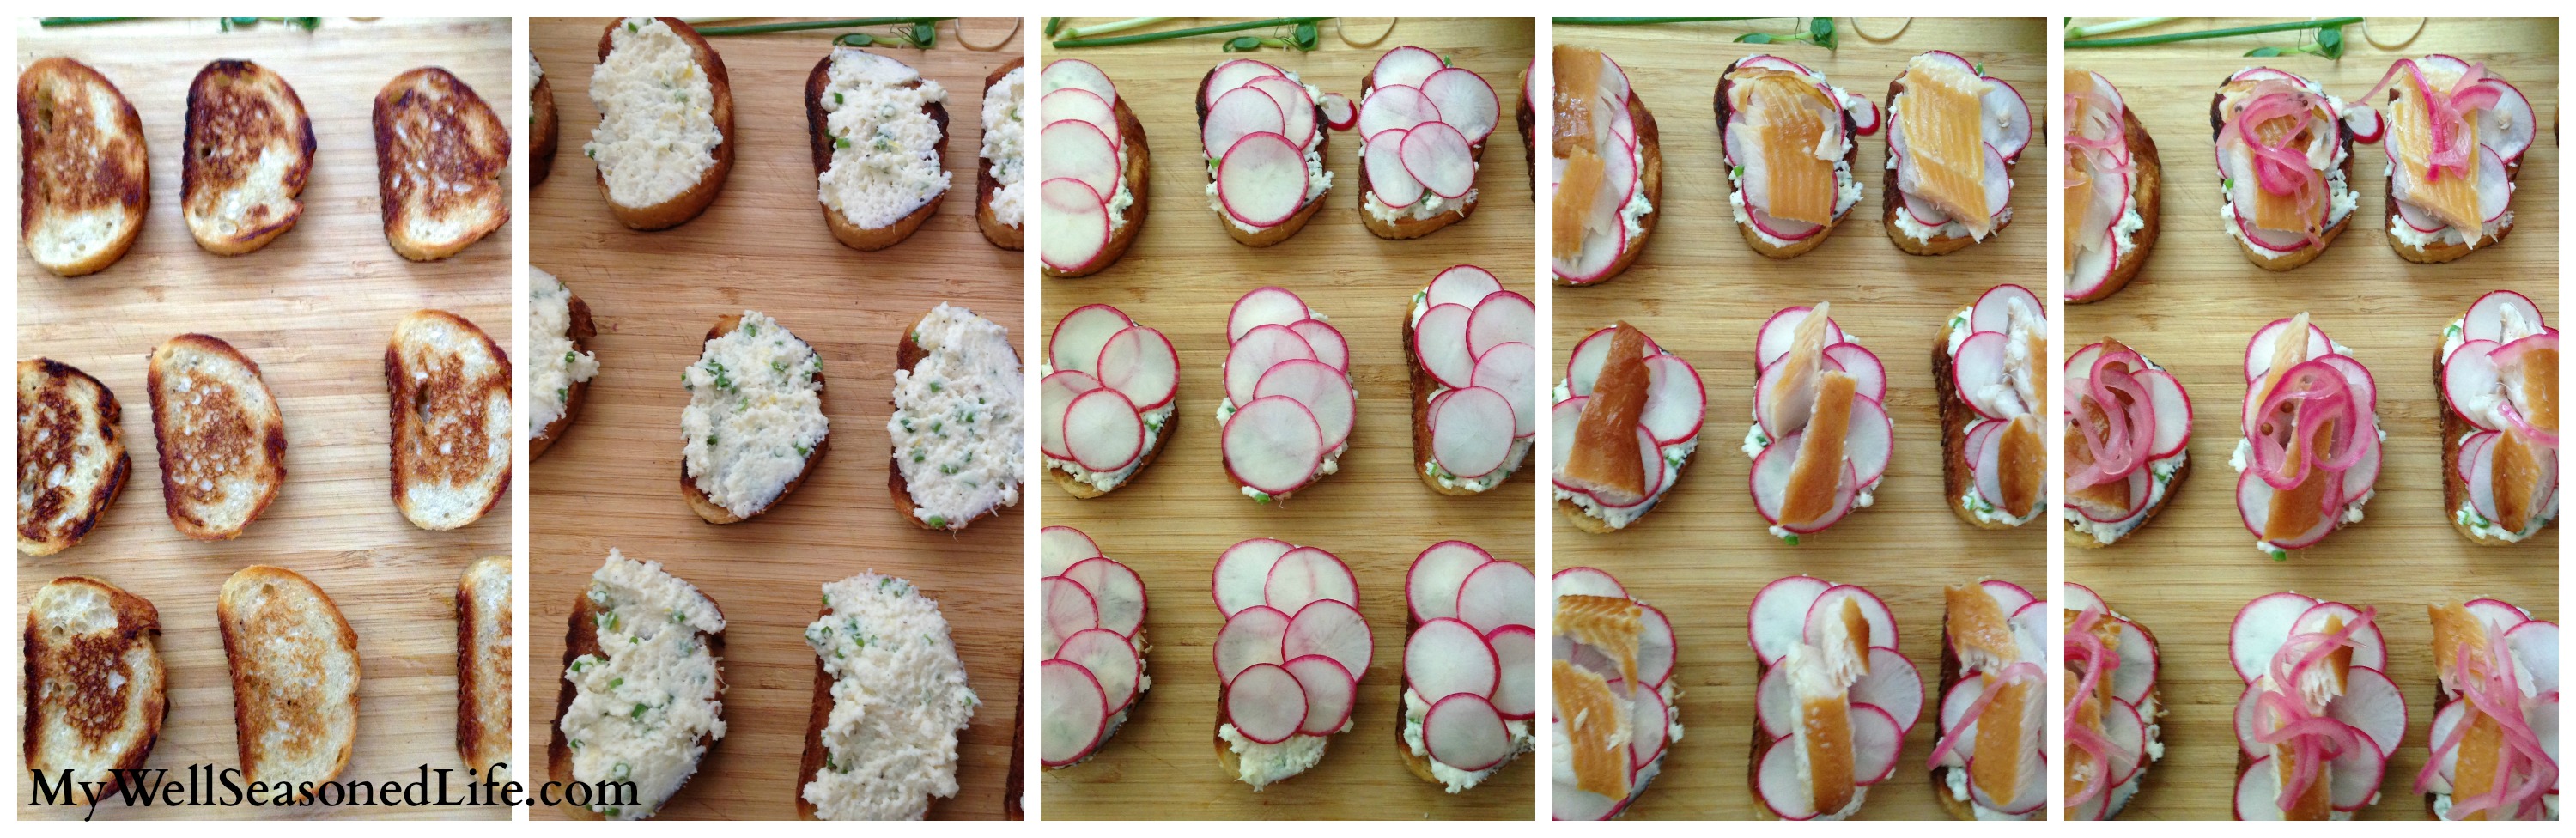 Smoked Trout Toasts